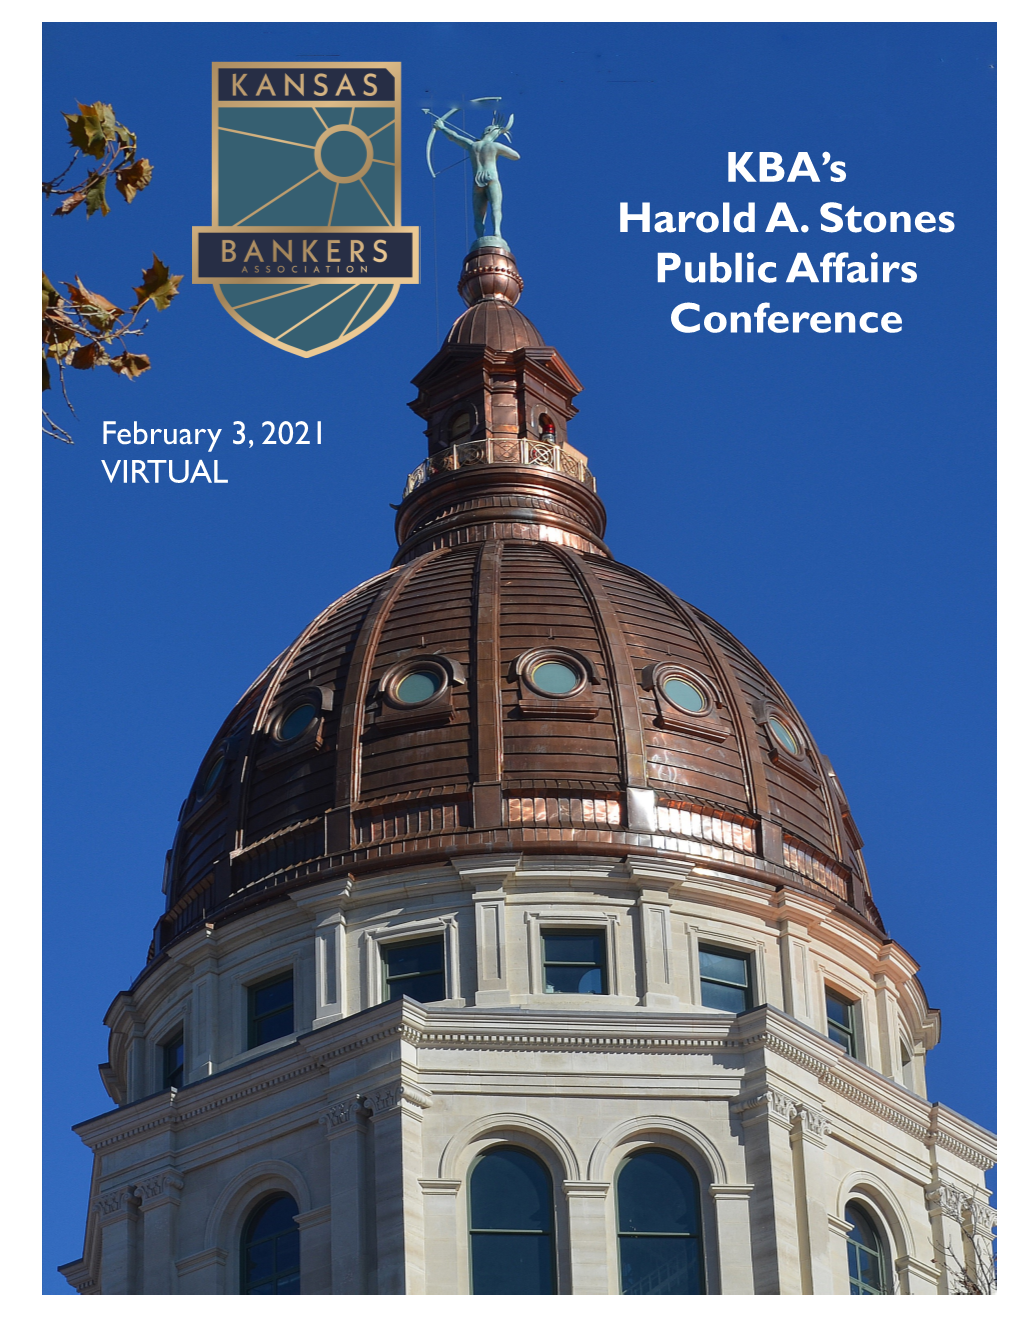 KBA's Harold A. Stones Public Affairs Conference